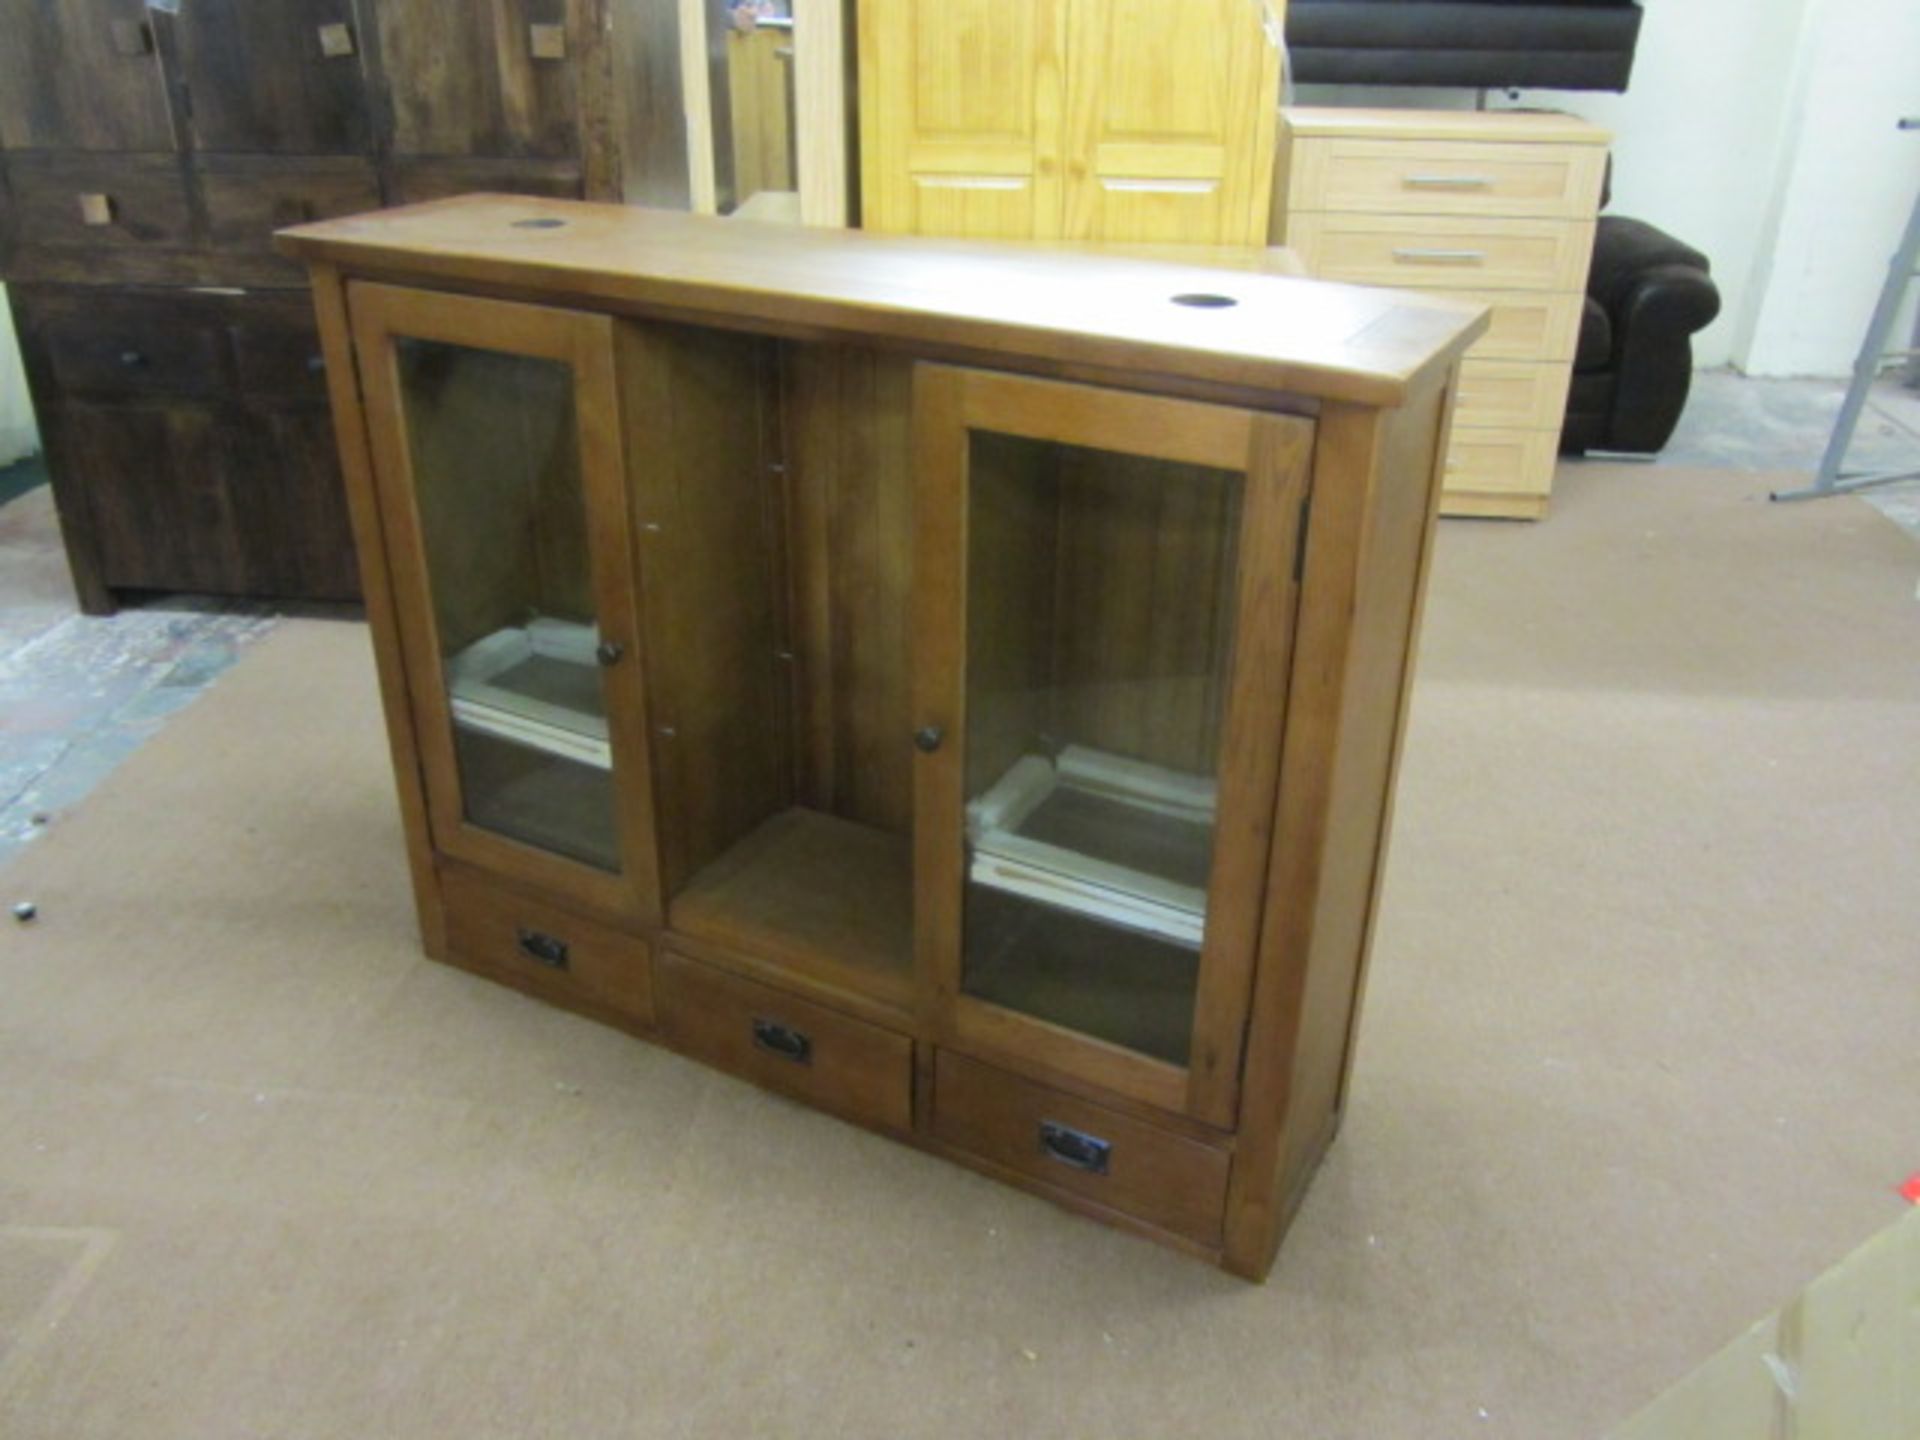 Glazed Dresser Top, with glass shelves, 2 glass doors and open centre over 3 drawers, Country Classi